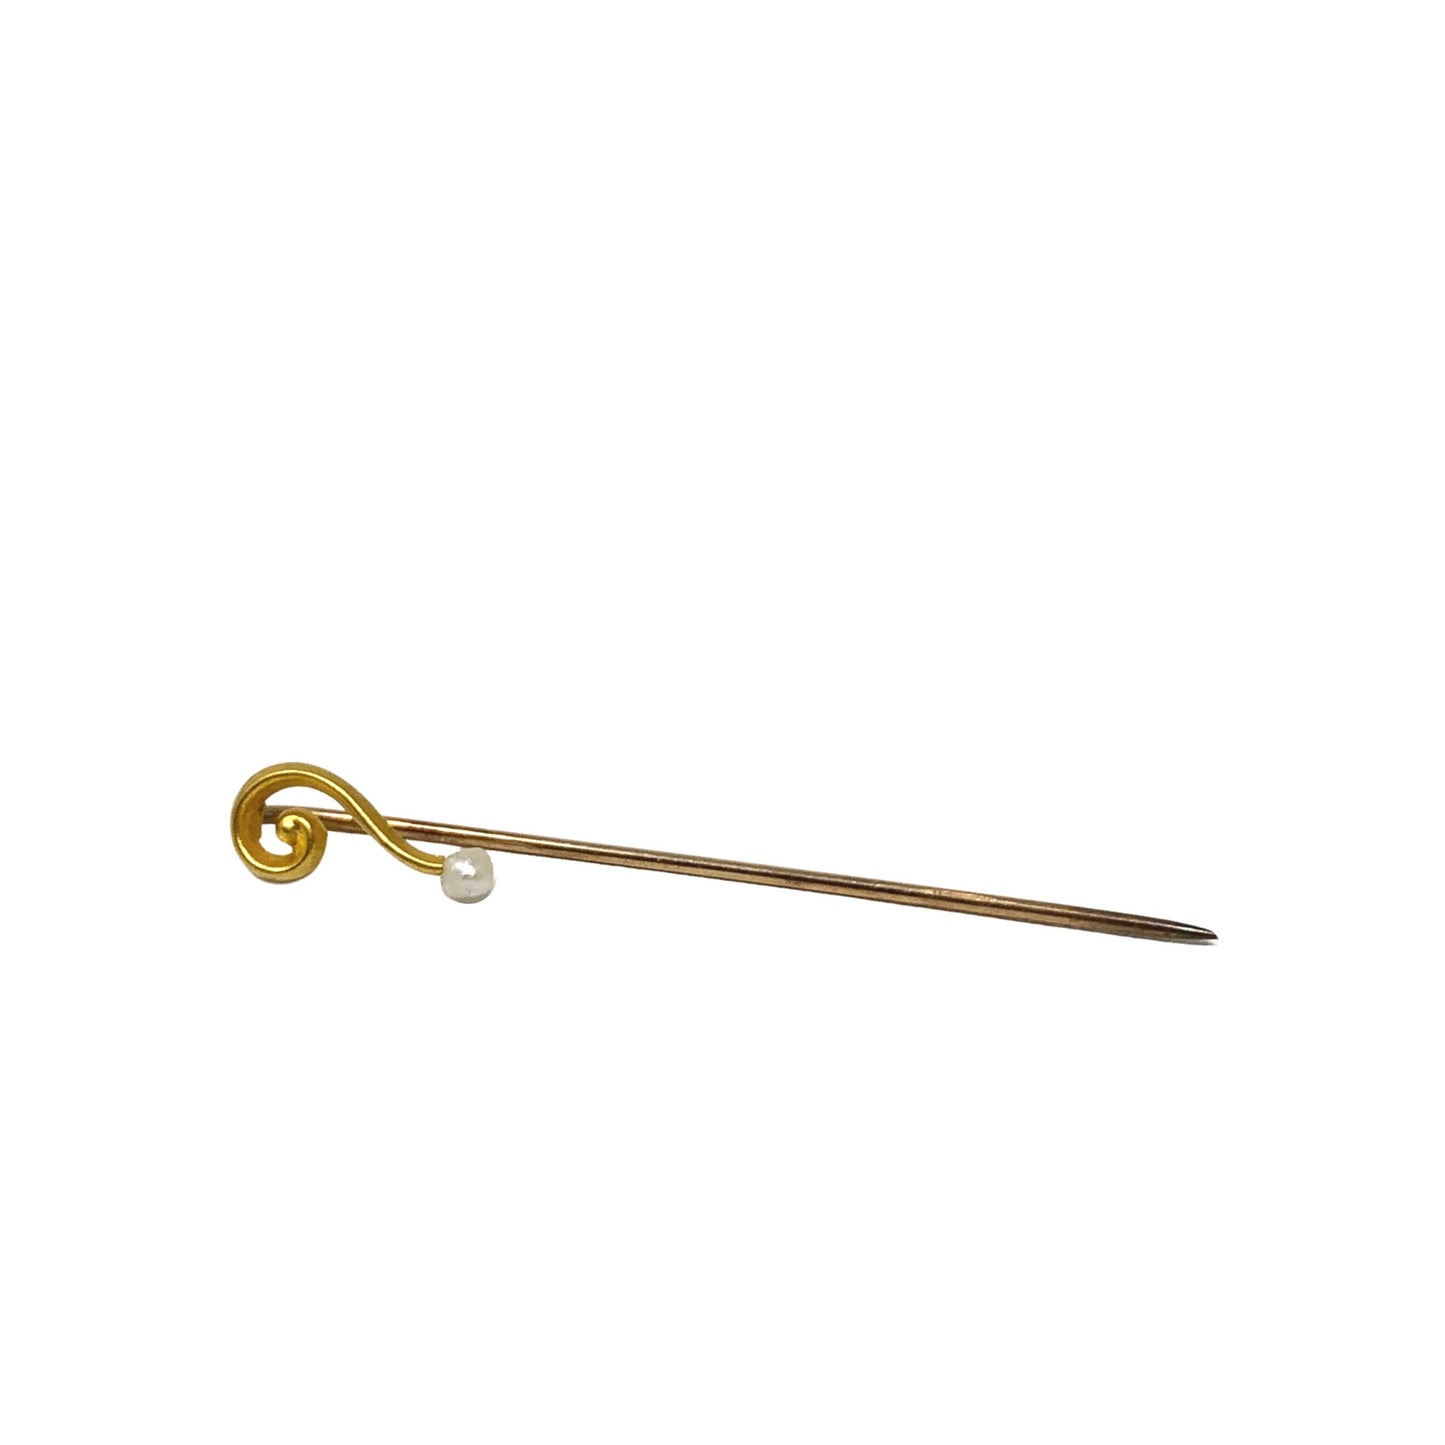 Antique 14K Gold Pearl Question Mark Swirl Stick Pin